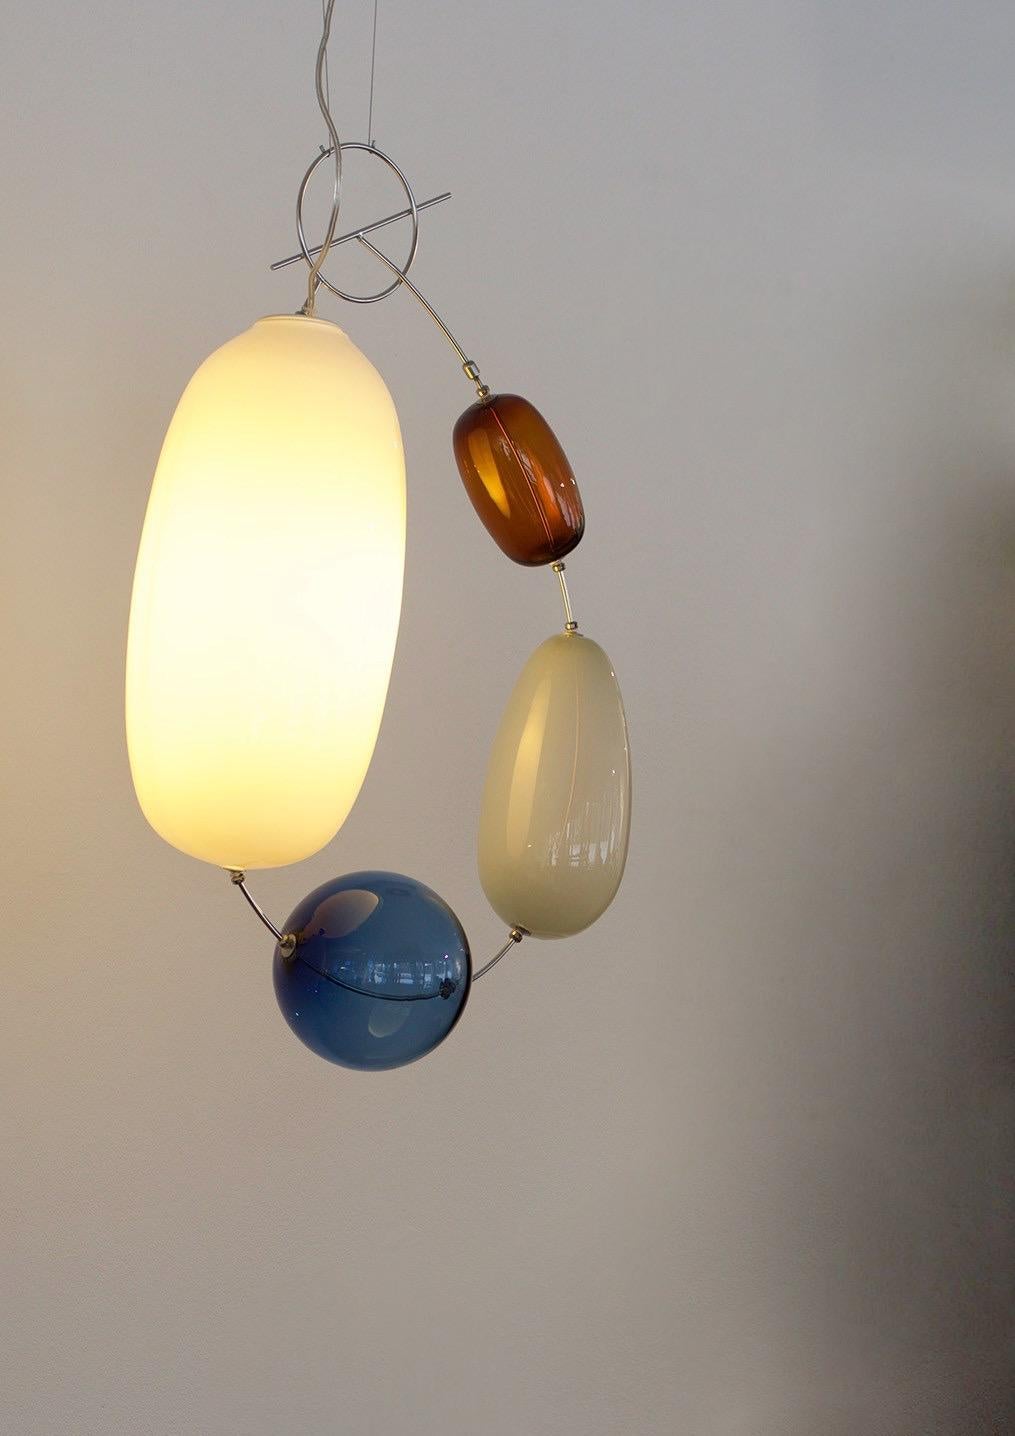 Exception pendant made out of mouth blown glass and stainless steel. A quality contemporary design named 'Hely' by Finnish designer Katriina Nuutinen.
The design was originally designed in 2009 and is made in a limited edition of only 200 pieces